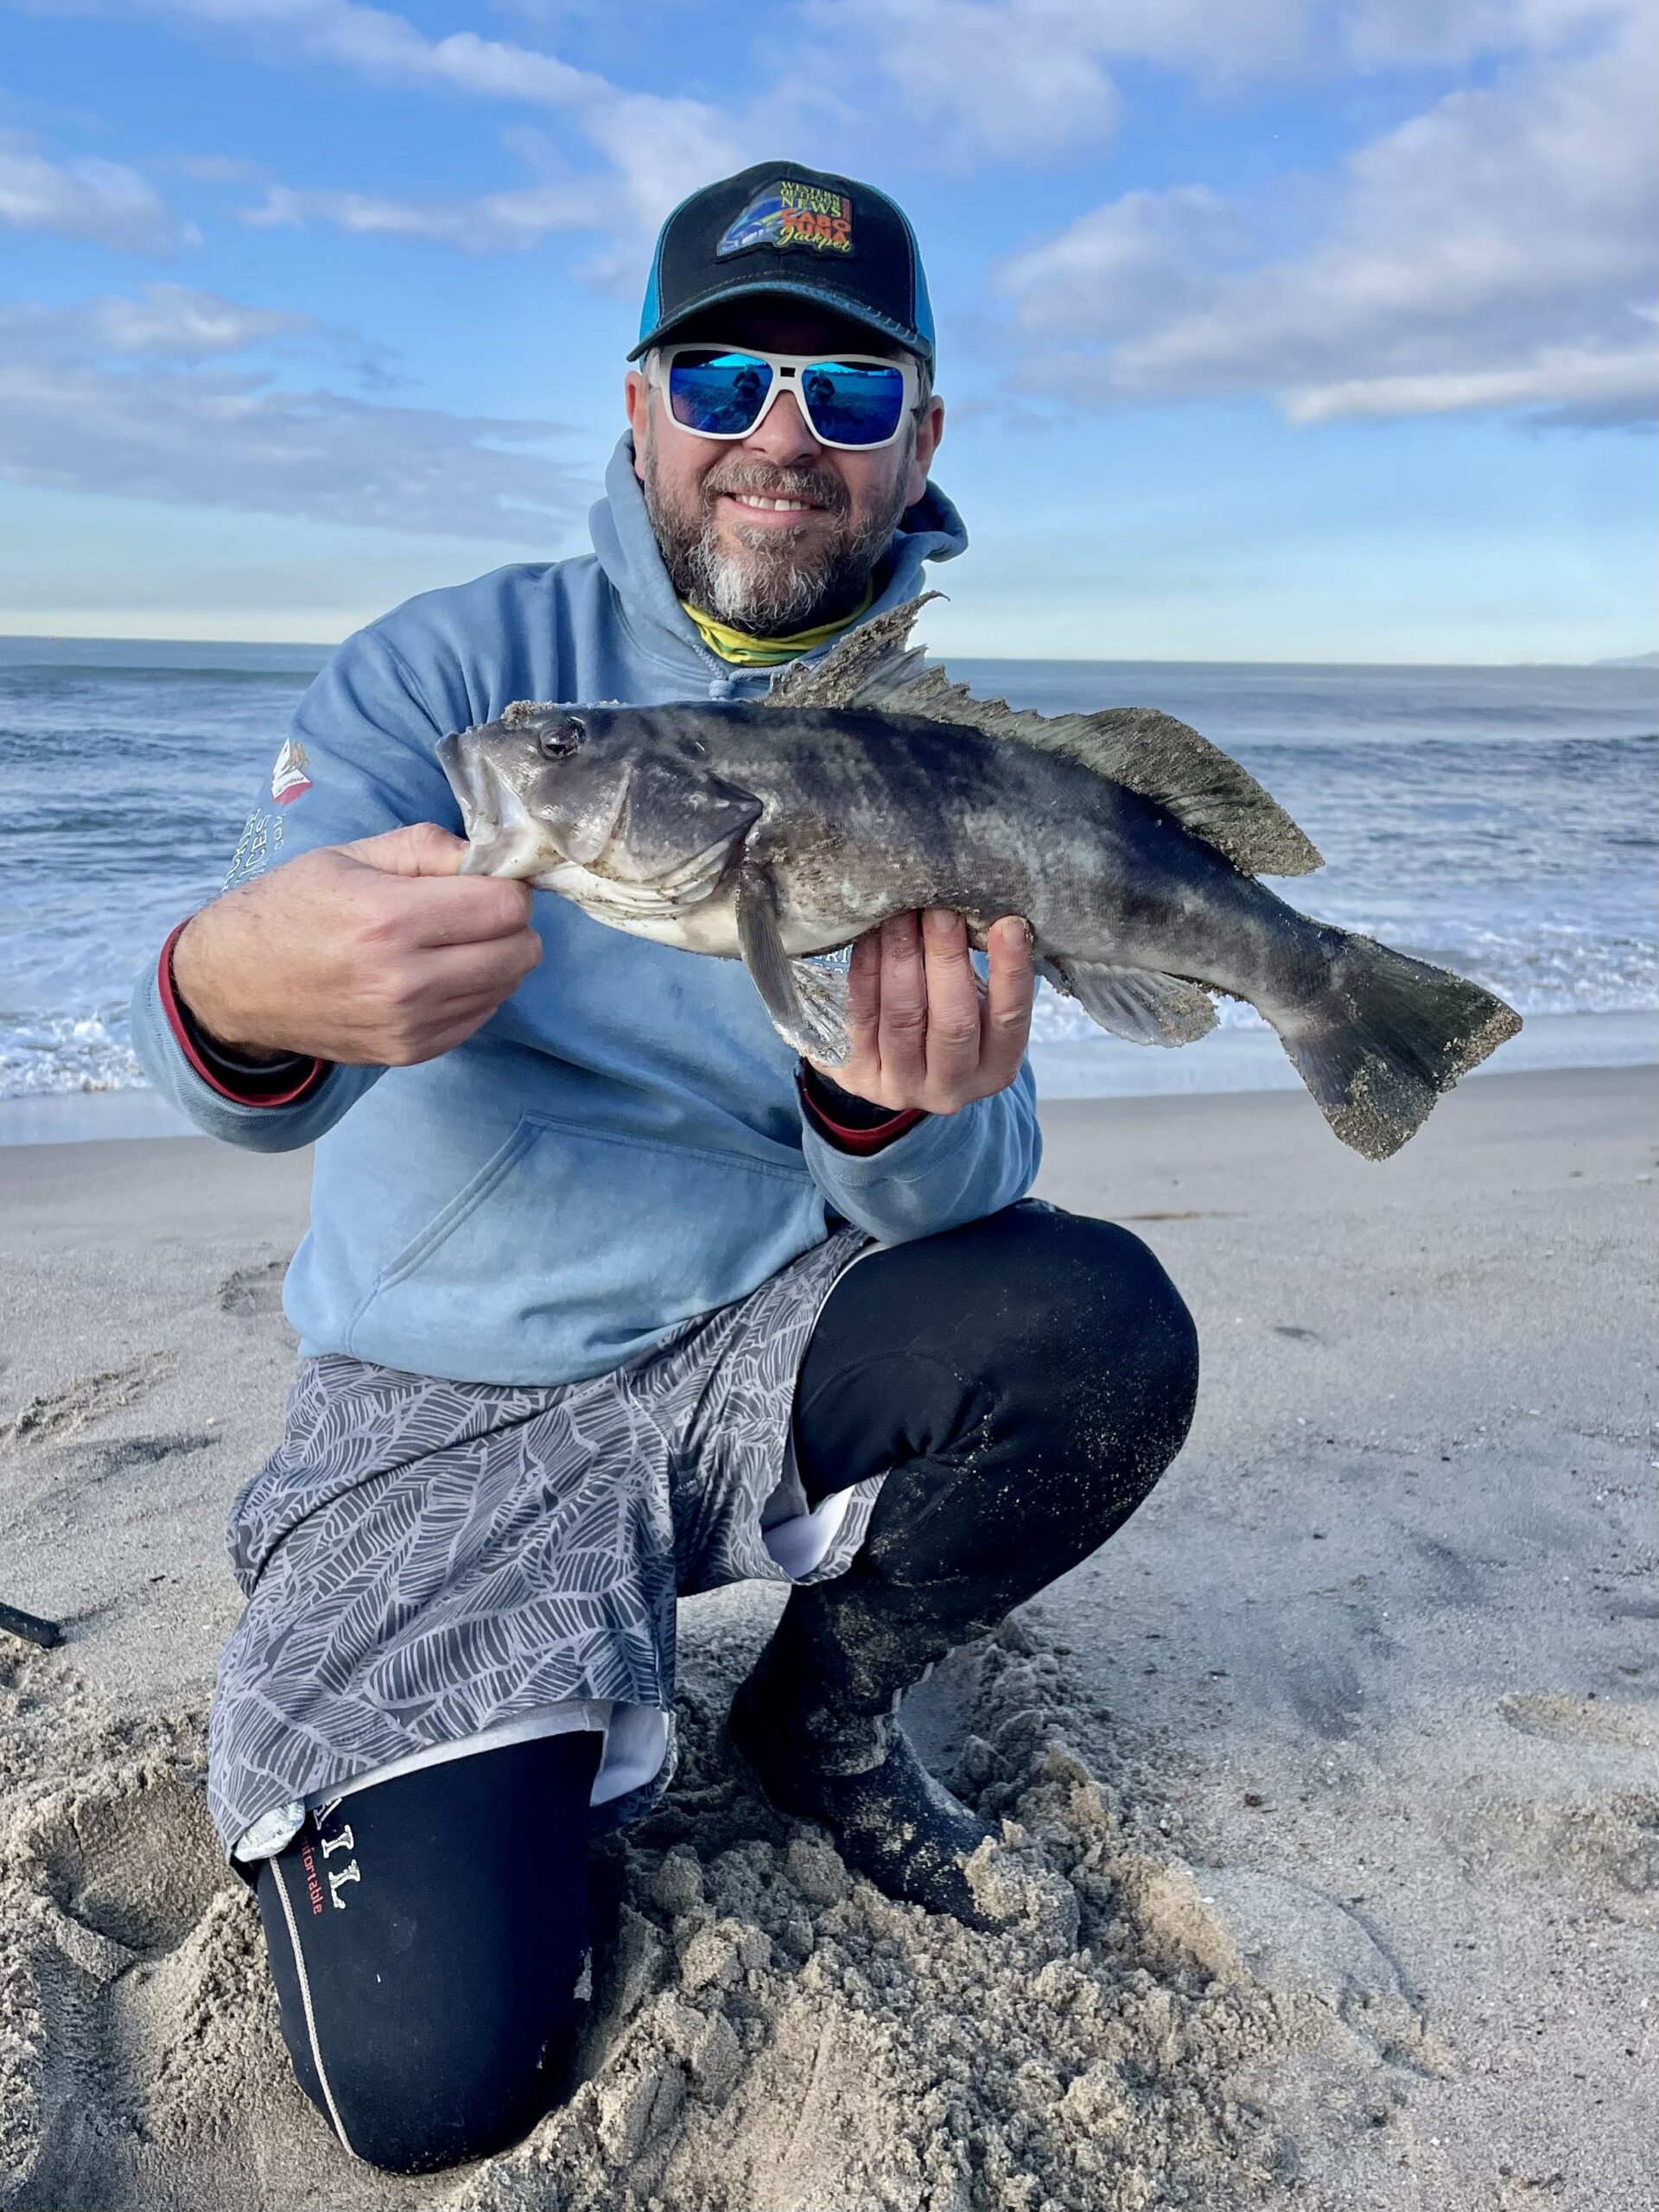 Surf fishing – Baits, locations, tackle and tactics for cold-water success  in the surf